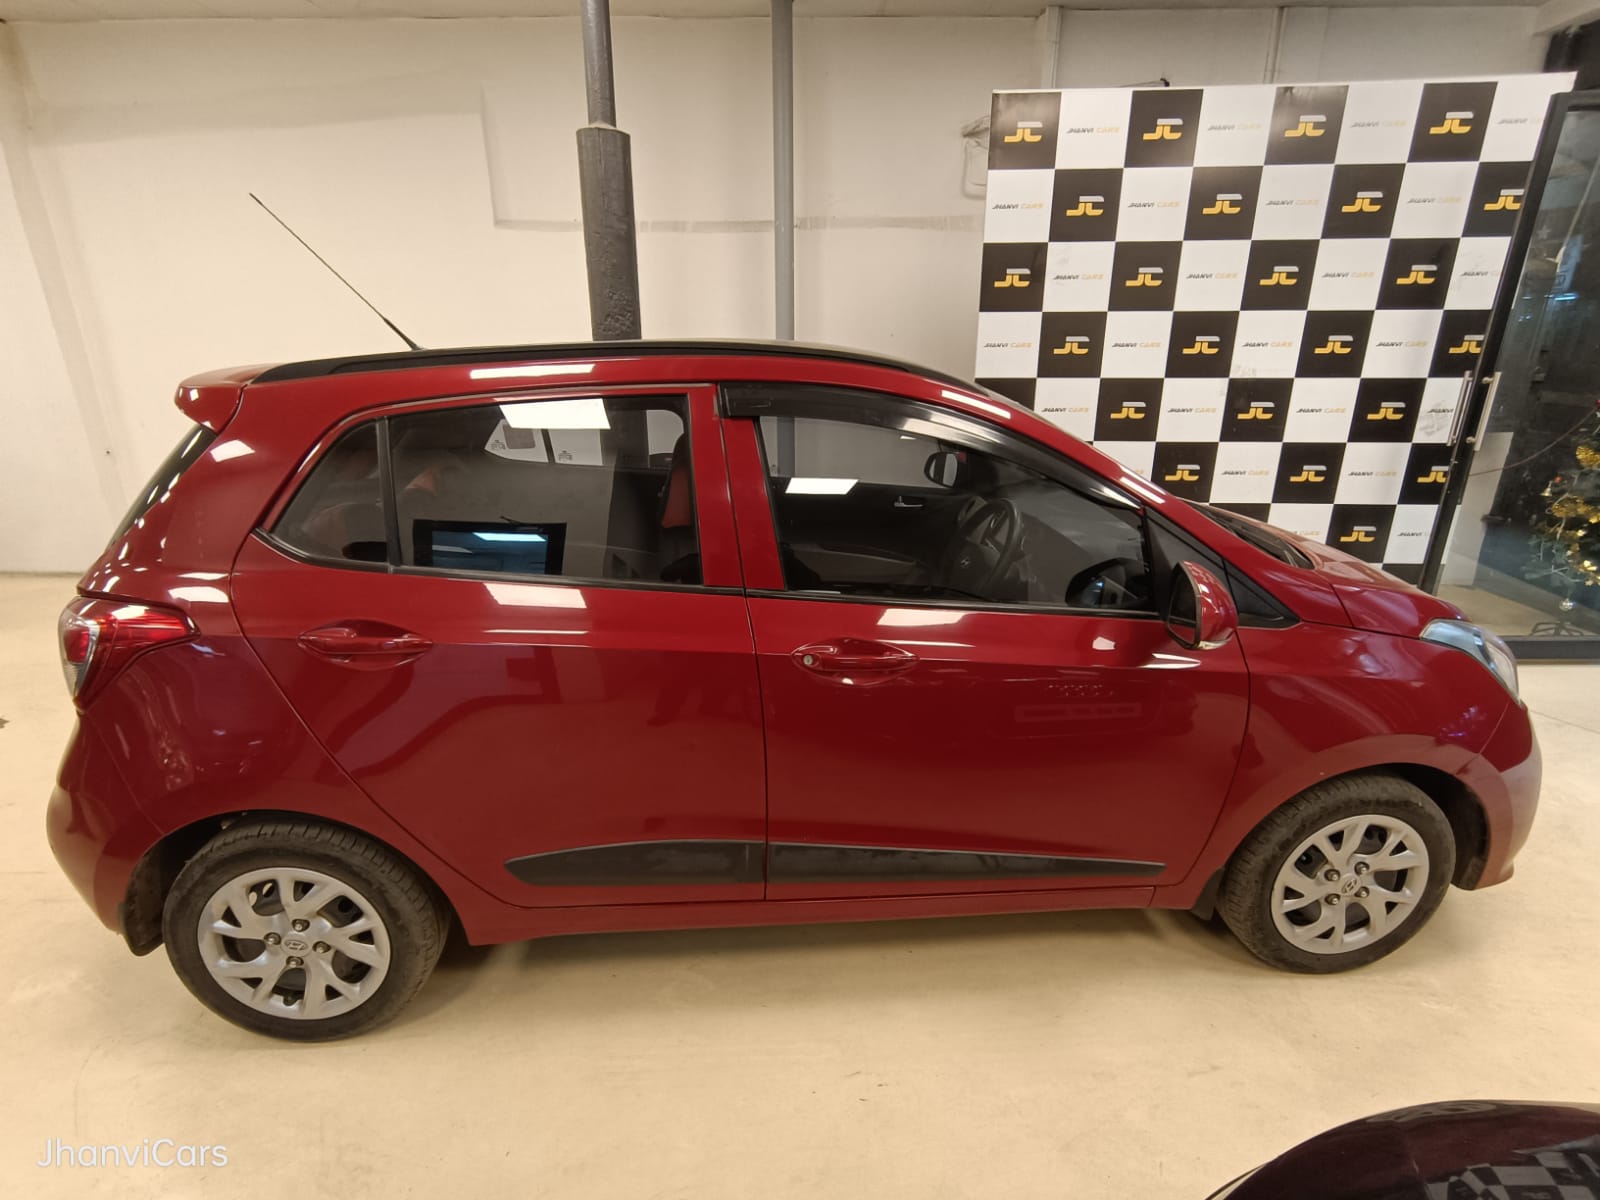 5800-for-sale-Hyundai-Grand-i10-Petrol-First-Owner-2019-TN-registered-rs-0